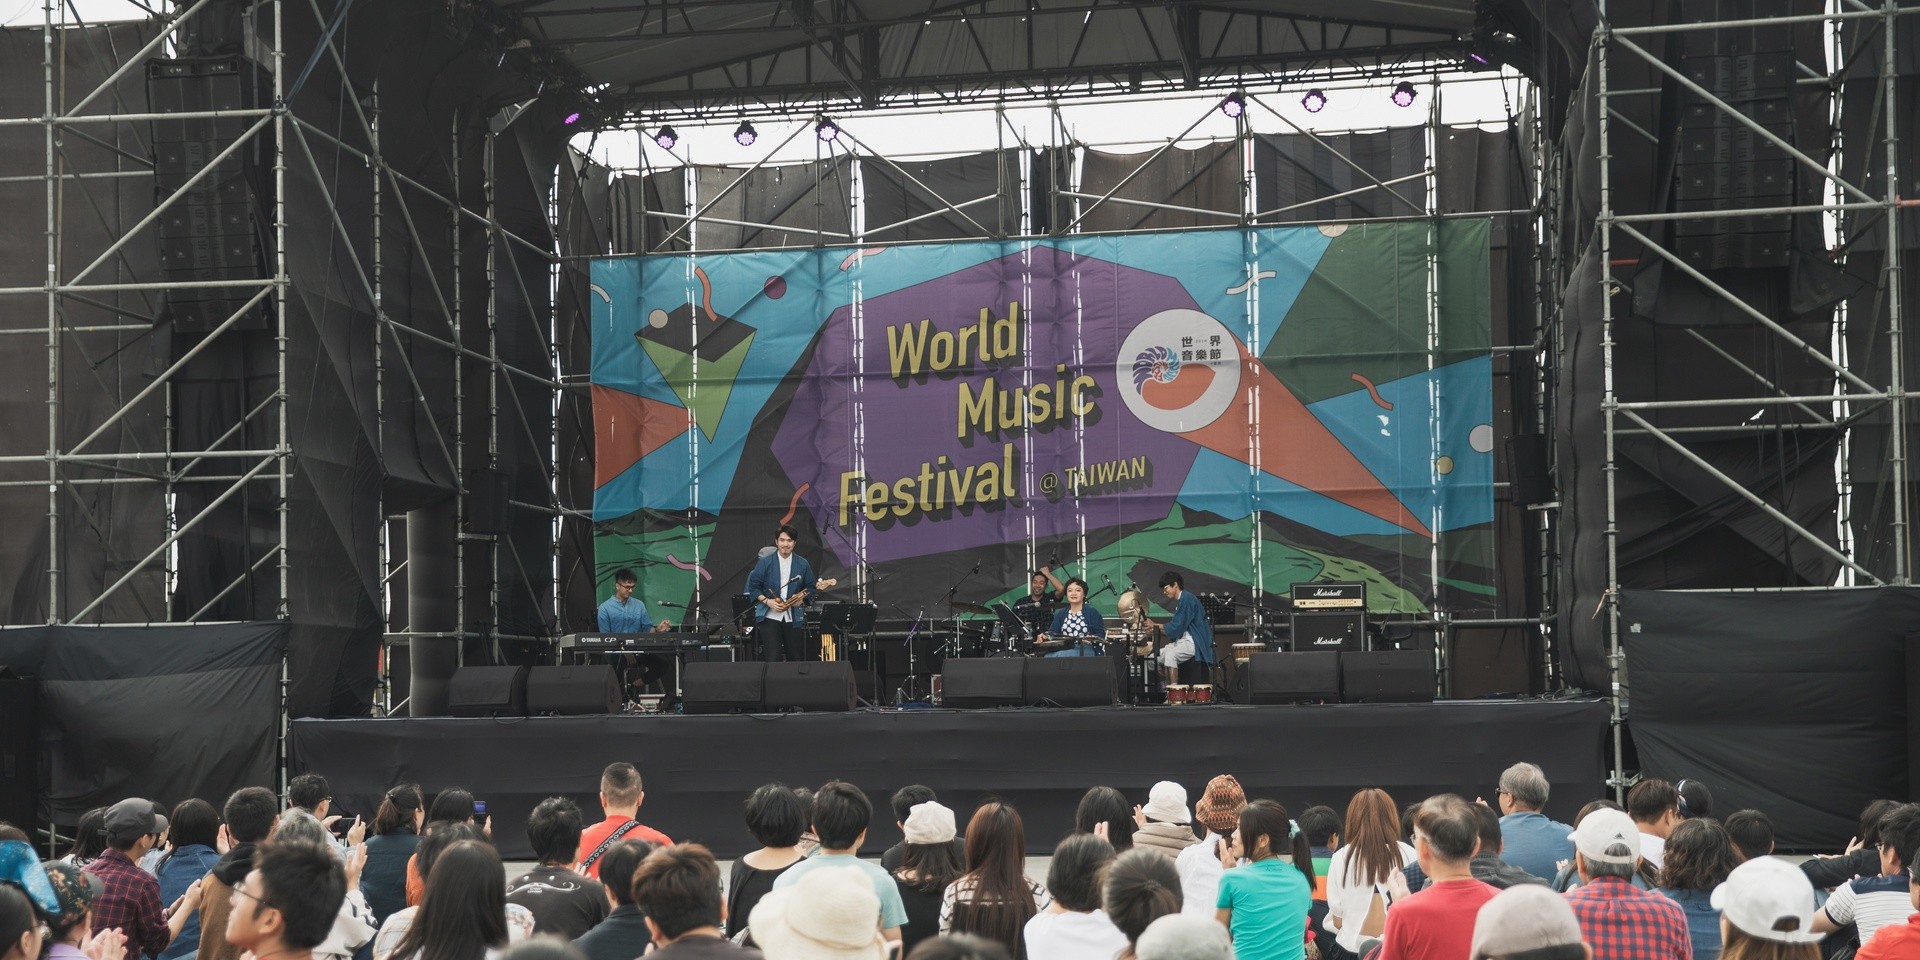 Don't Miss These 7 Acts From World Music Festival 2019